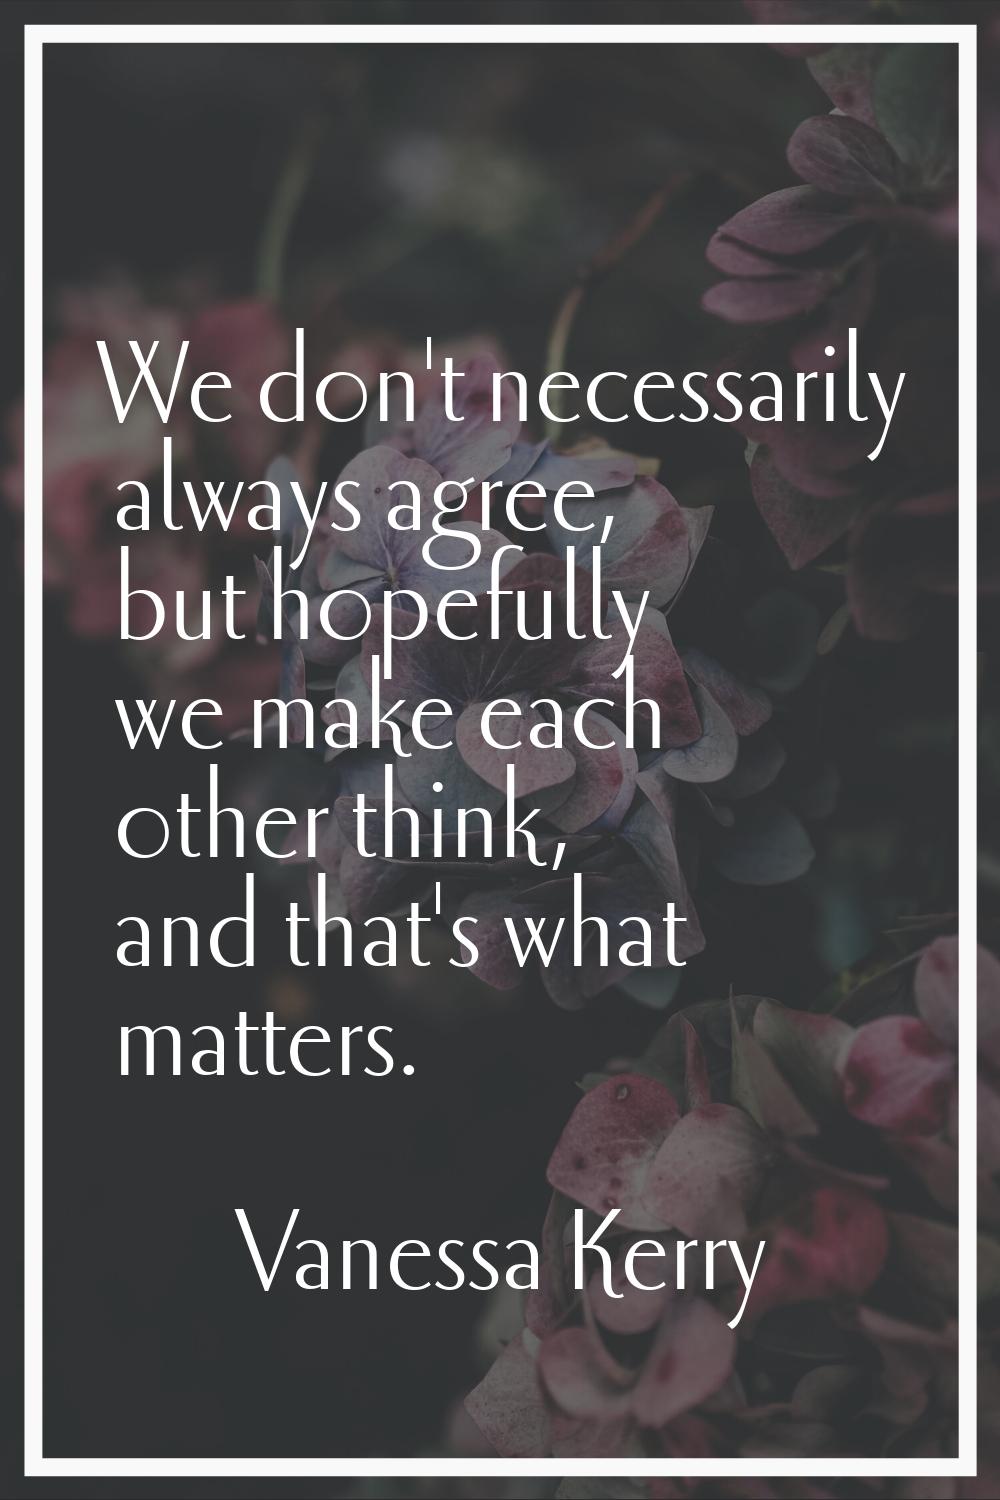 We don't necessarily always agree, but hopefully we make each other think, and that's what matters.